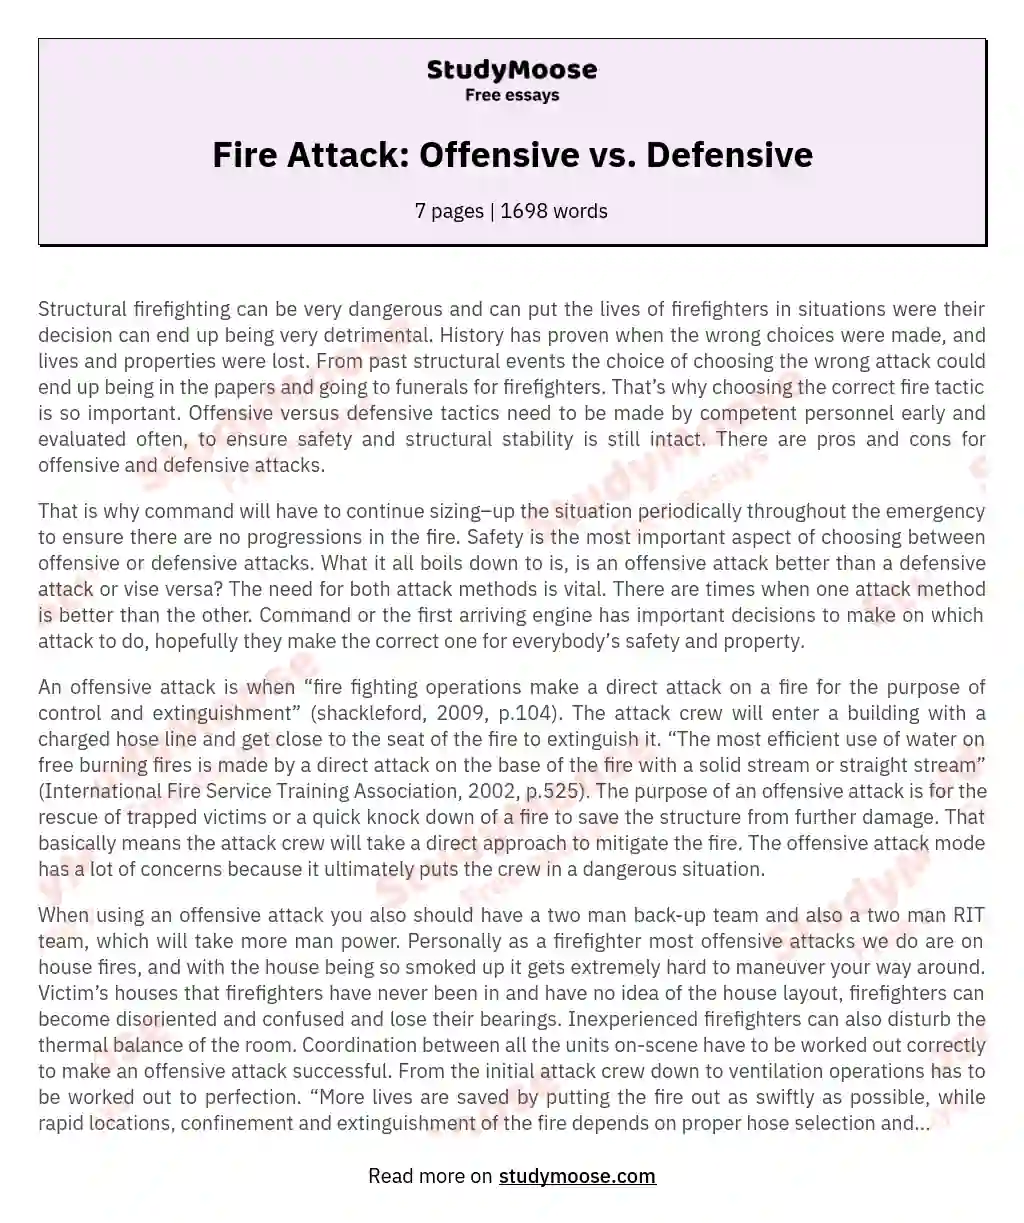 Structural Firefighting Strategies: Offensive vs. Defensive essay